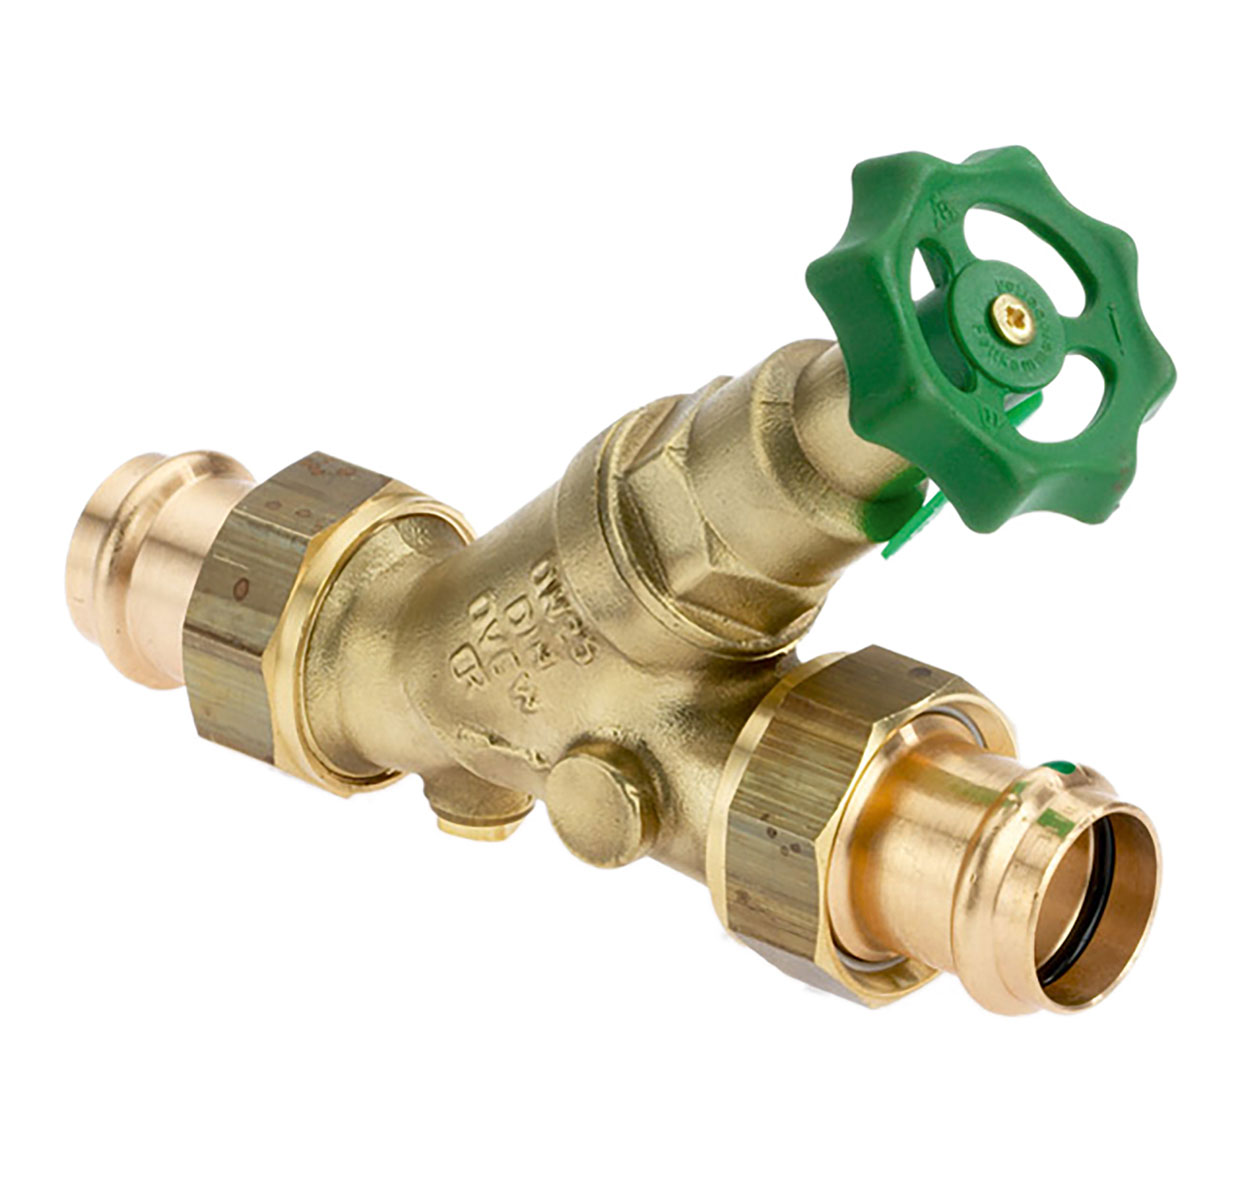 1630280 - CR-Brass Combined Free-flow and Backflow-preventer Valve Viega Profipress, not-rising, without drain valve